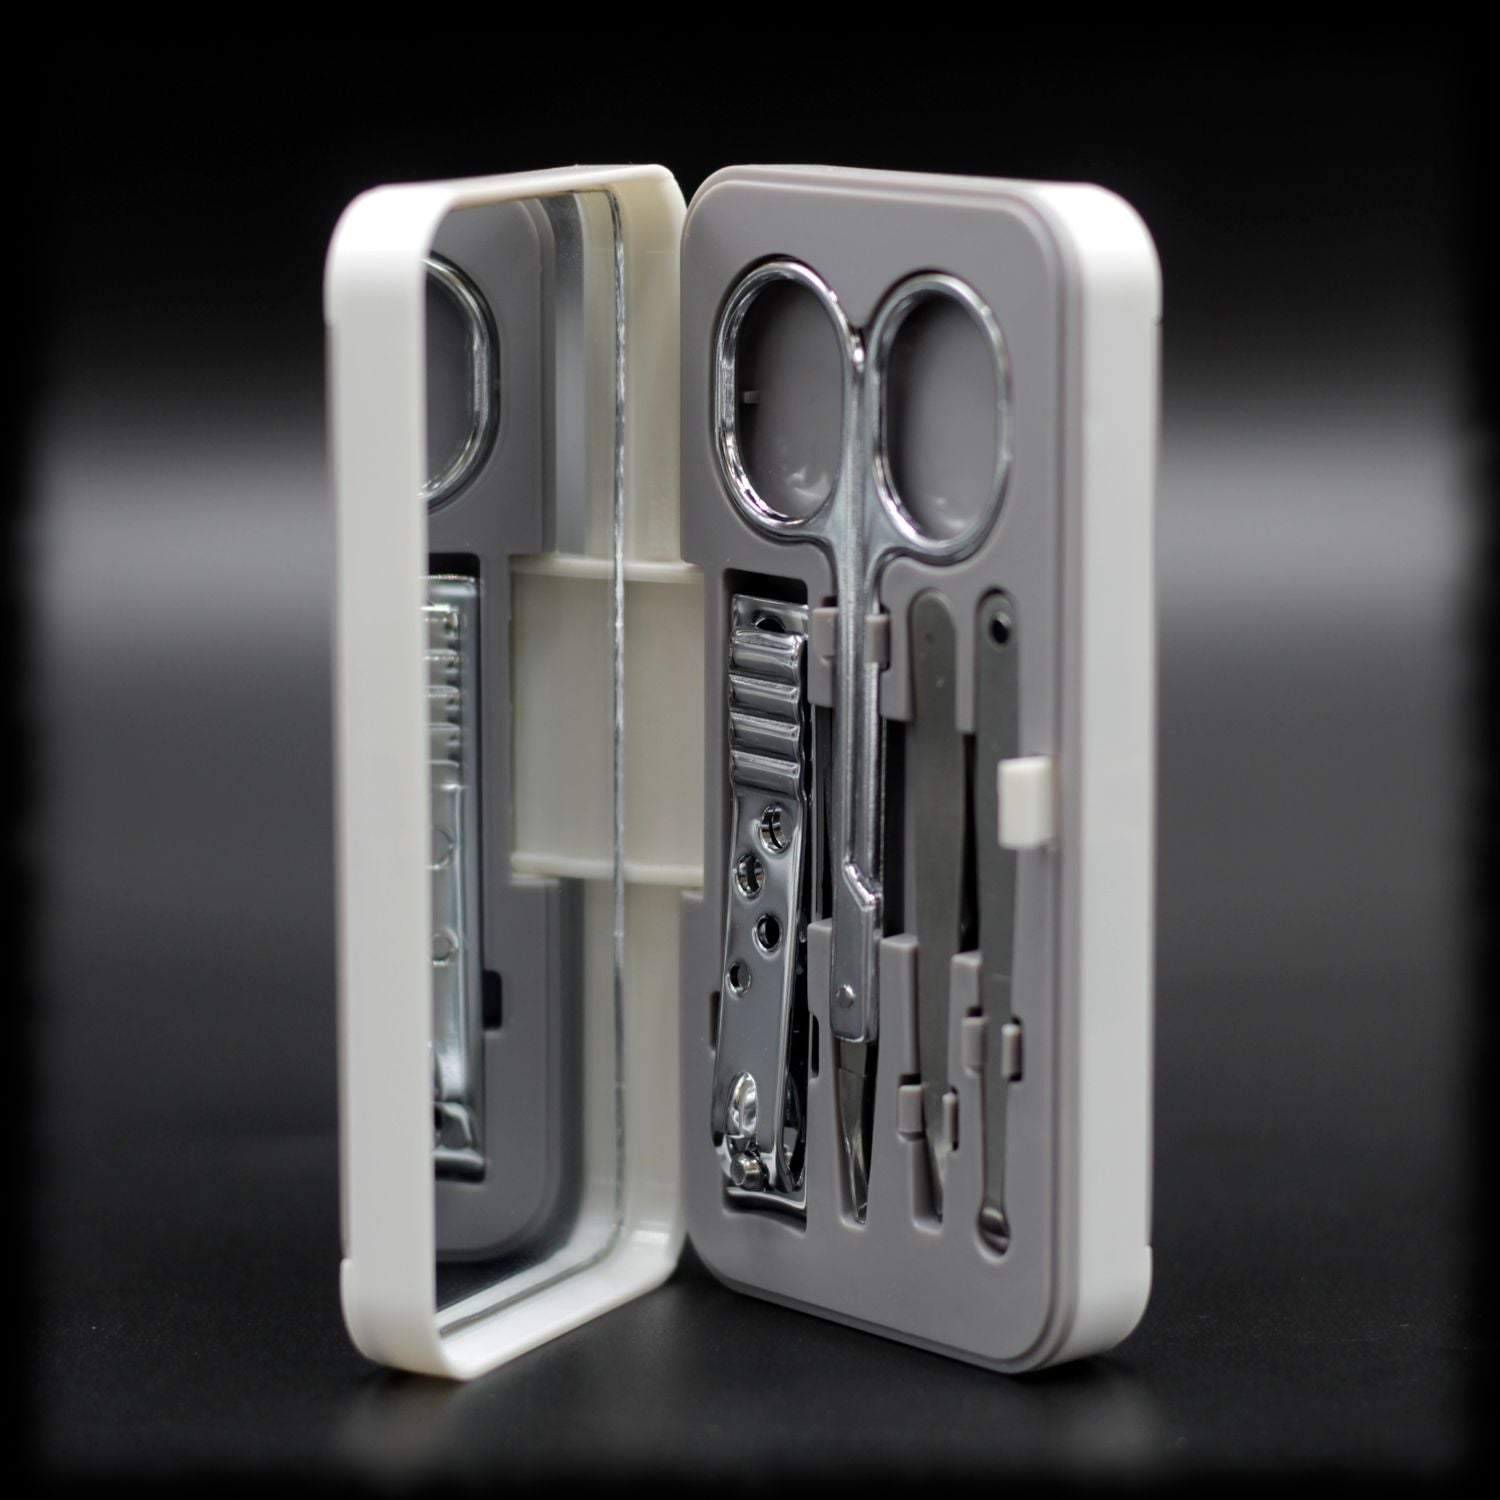 Naturally Wicked Exquisite Stainless Steel Manicure Gift Set For Her With Classy Mirror